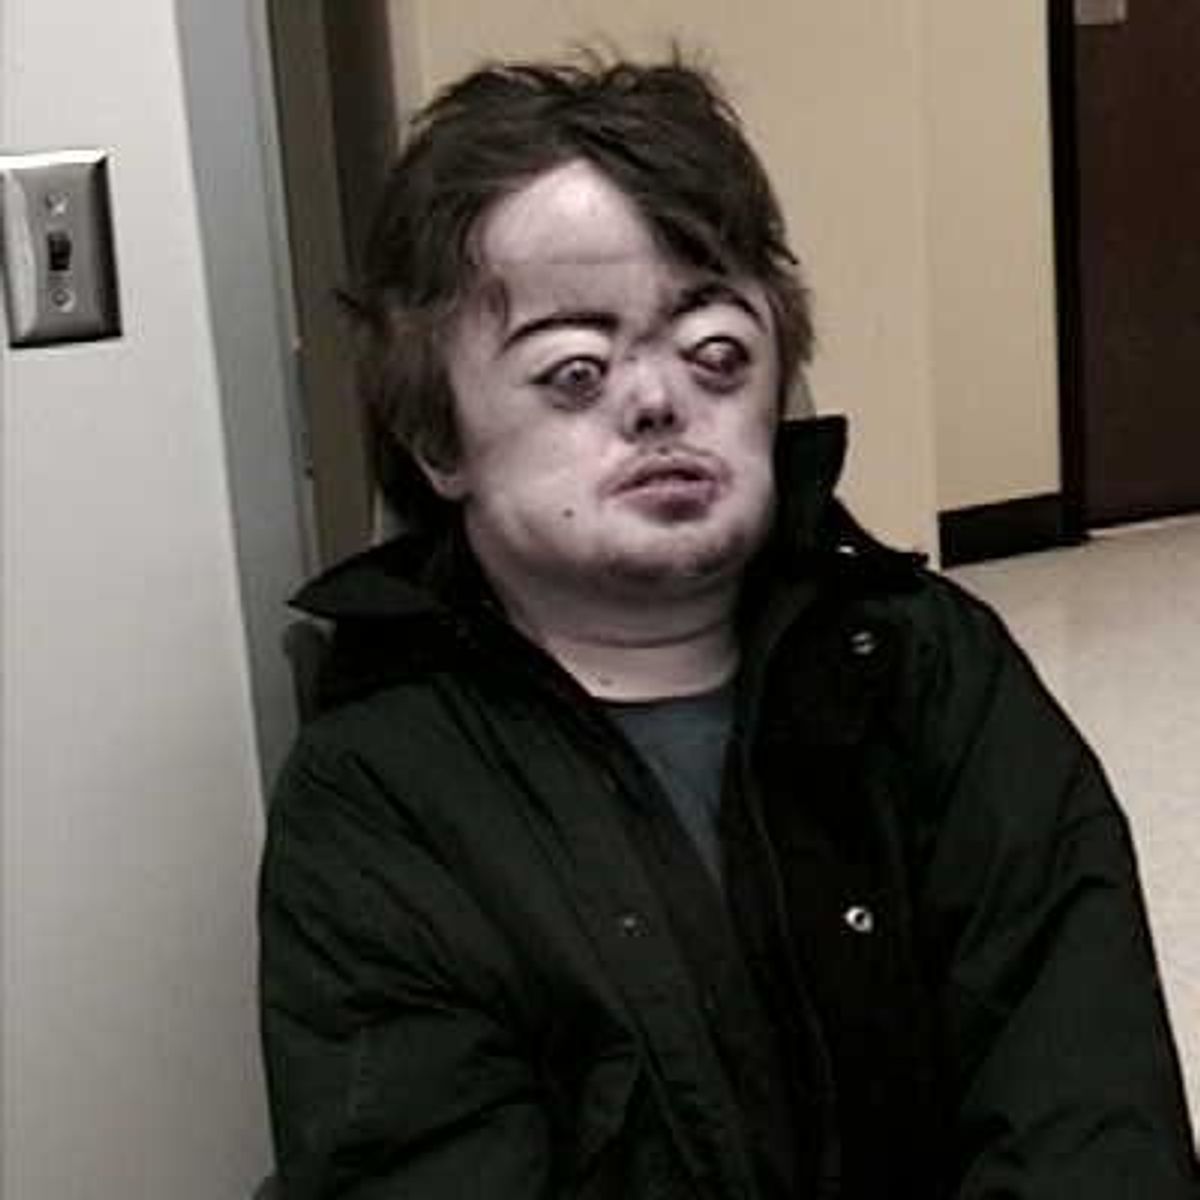 Brian Peppers Snopes